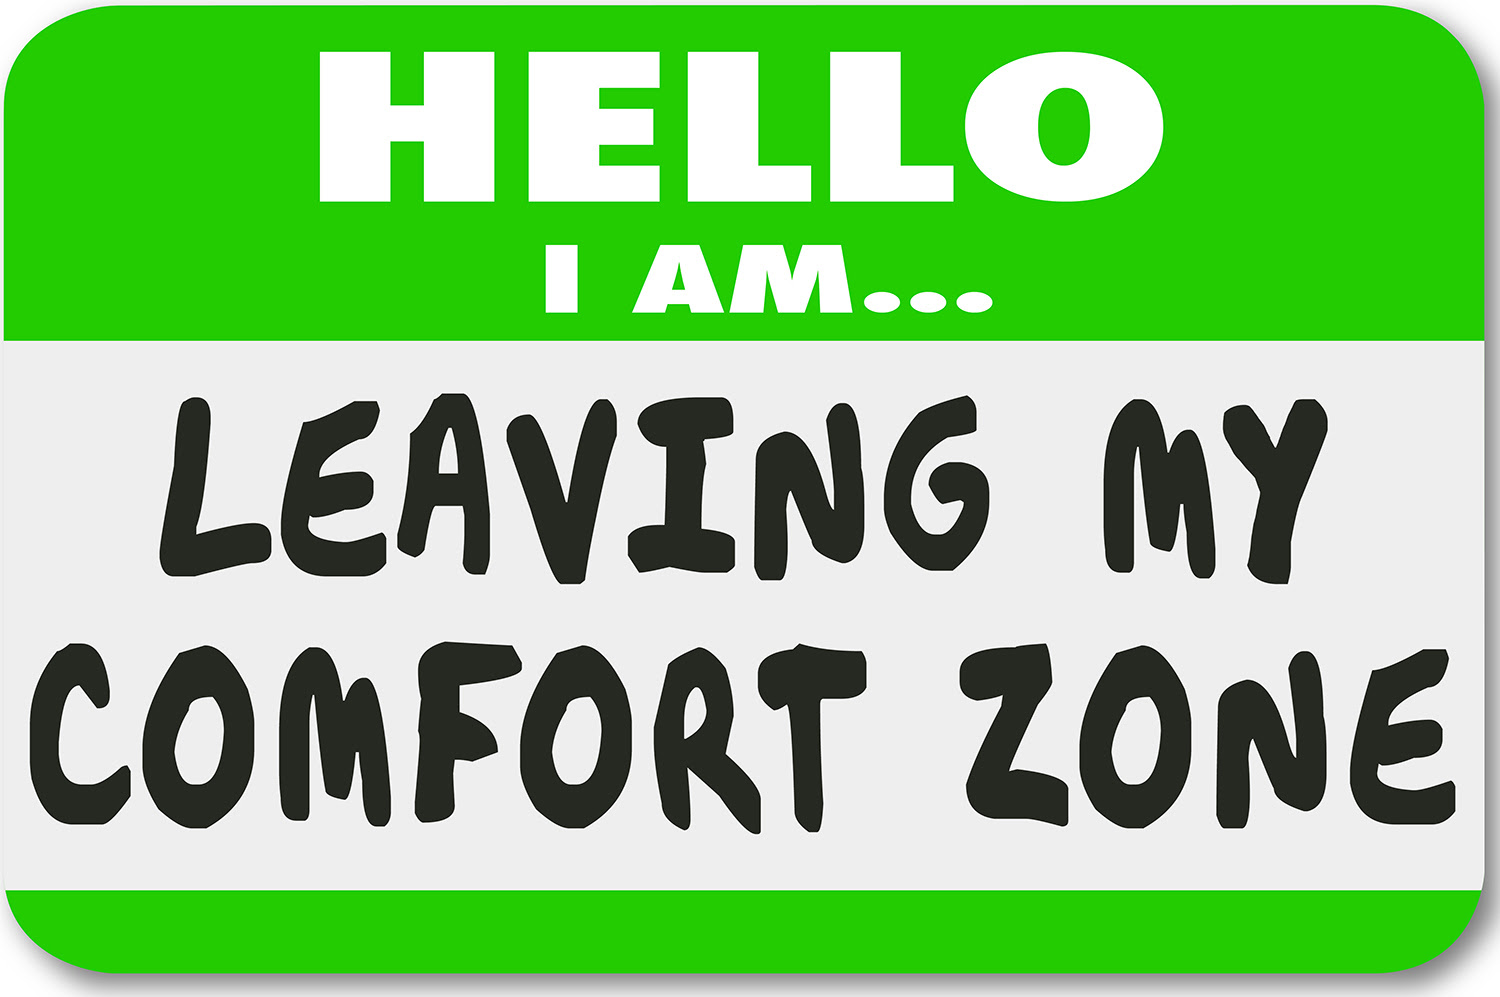 I am leaving my comfort zone.